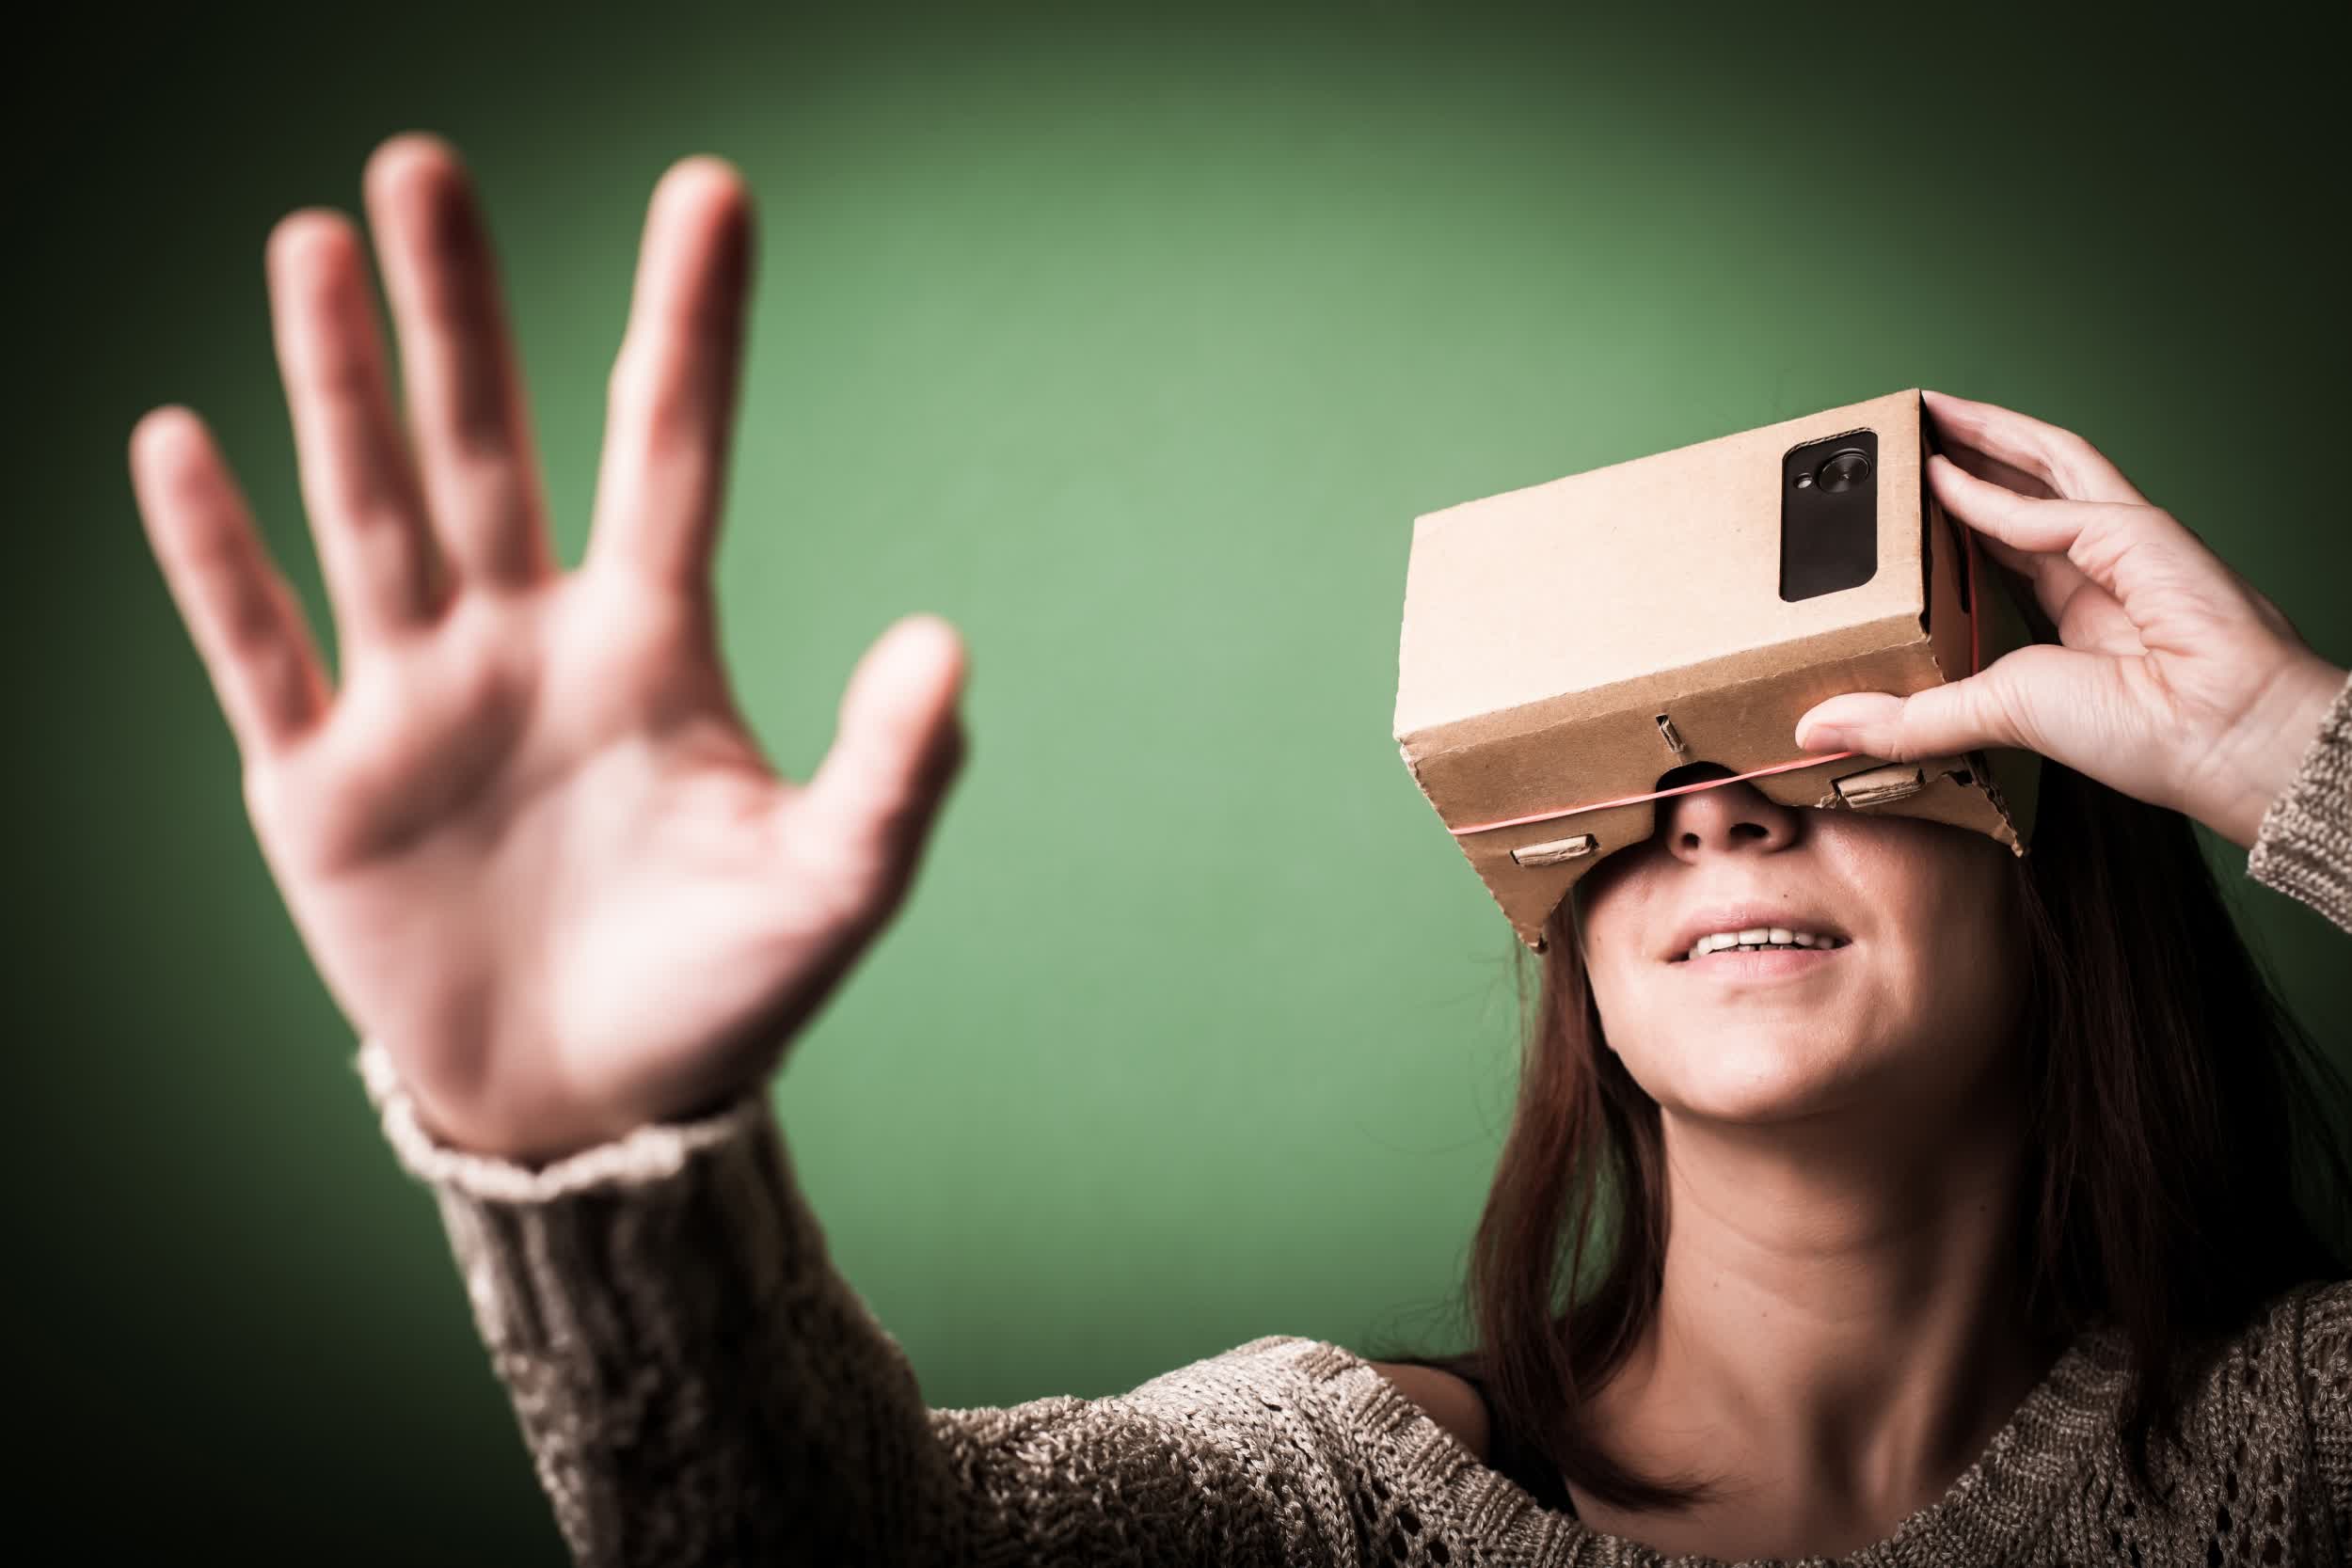 Google discontinues Cardboard VR viewer after nearly seven years